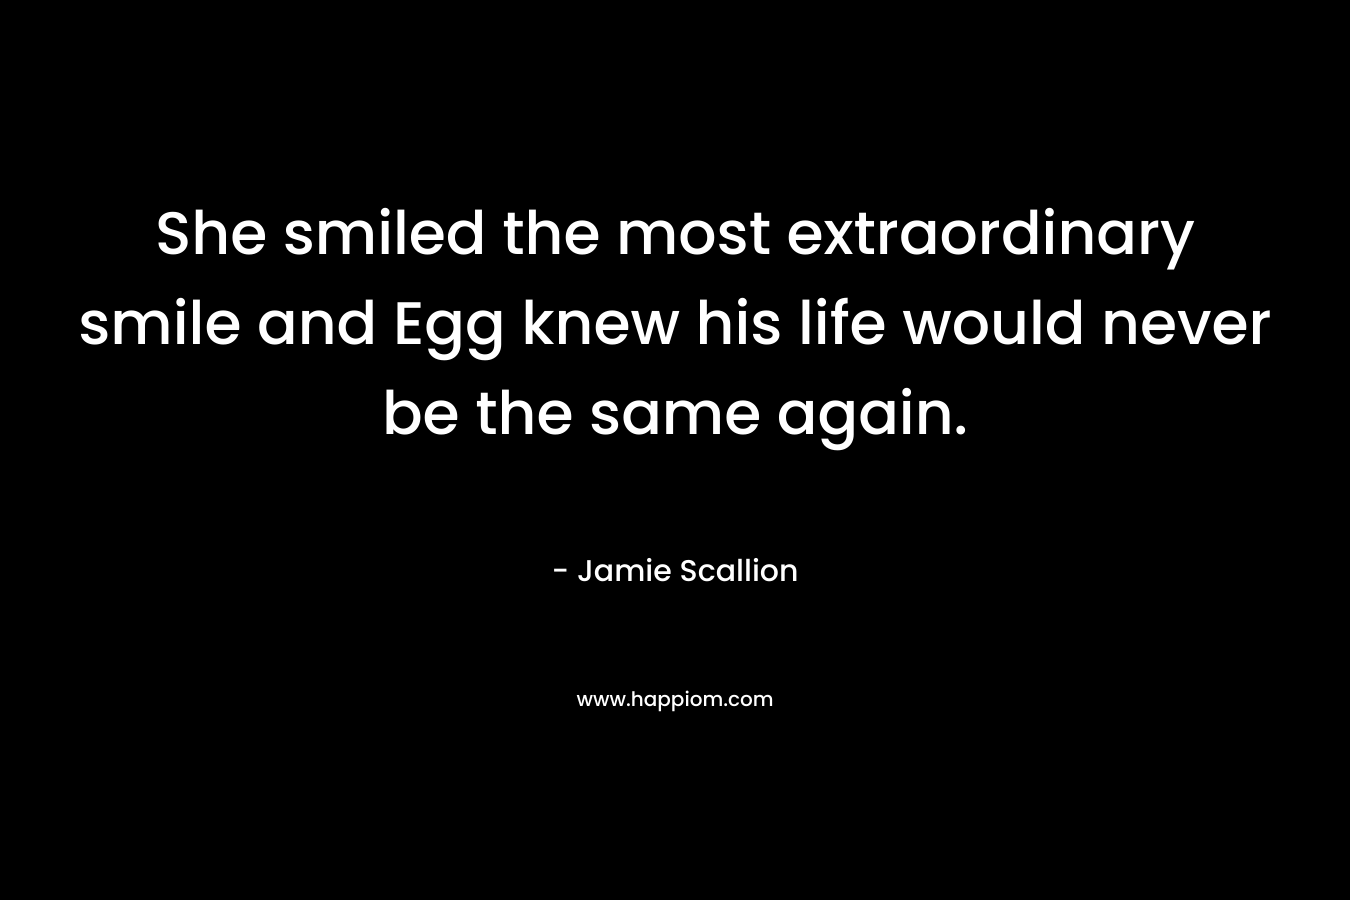 She smiled the most extraordinary smile and Egg knew his life would never be the same again. – Jamie Scallion